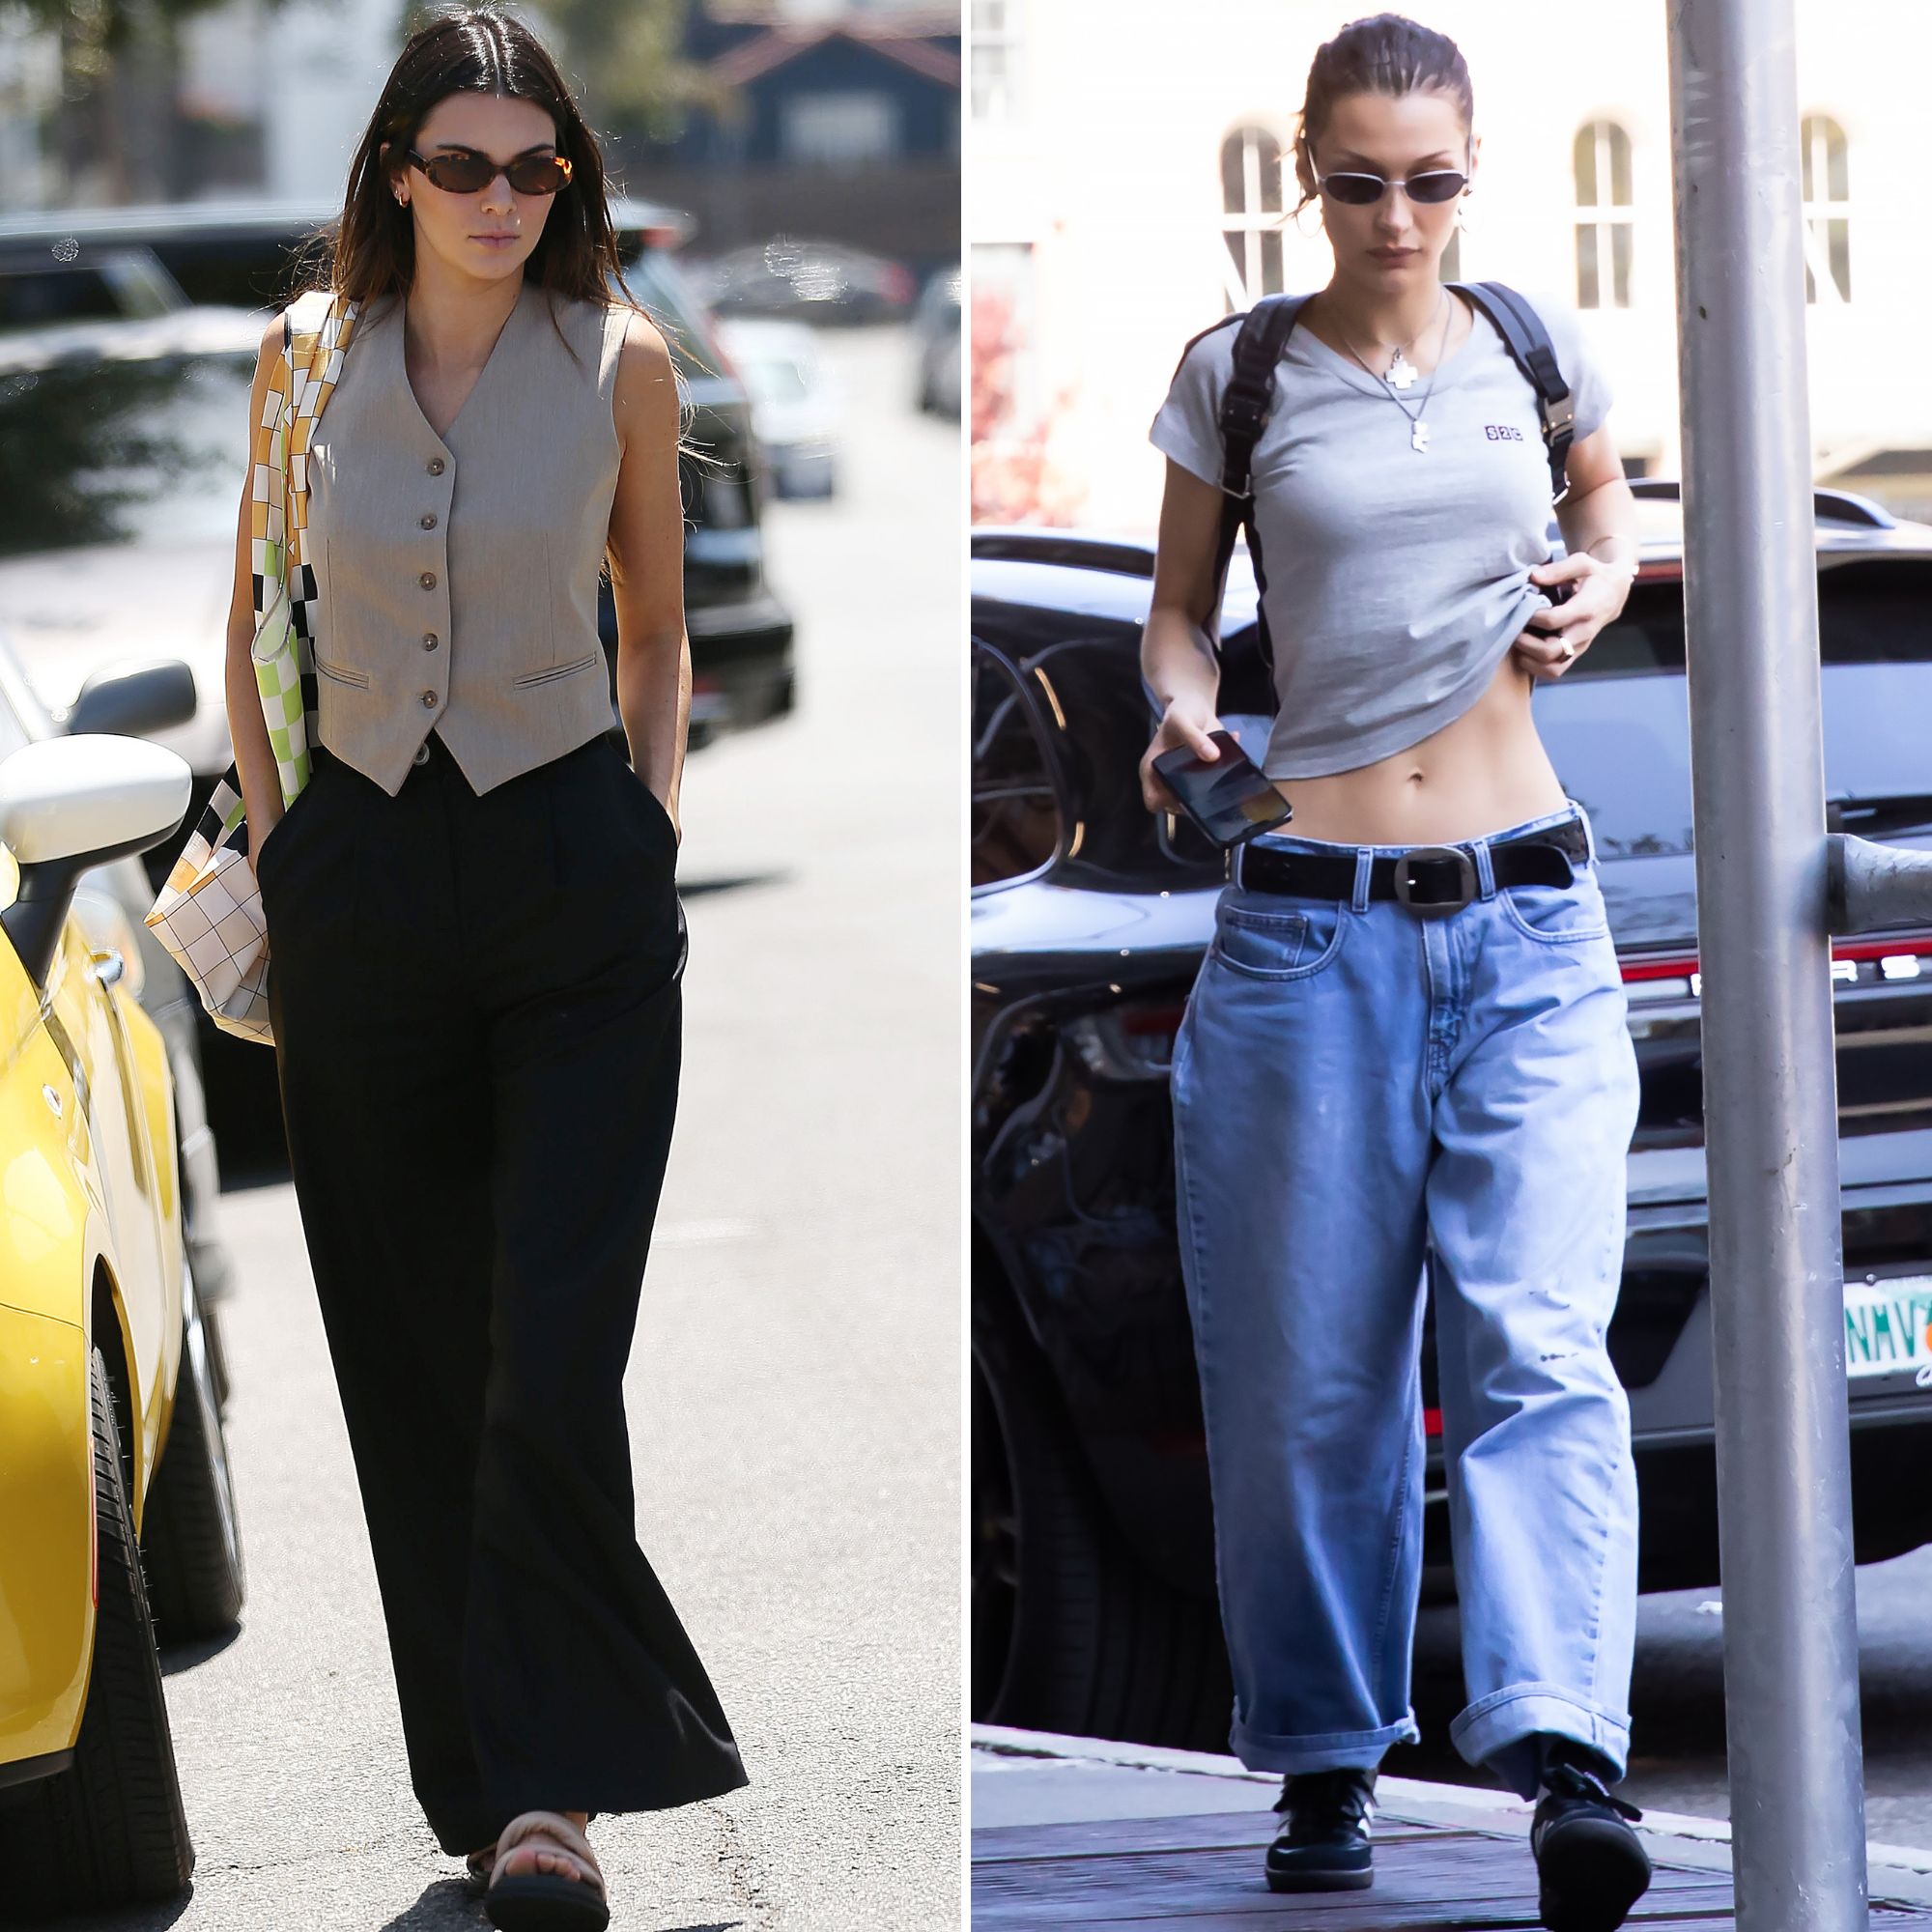 Celebrities Wearing Baggy Pants Photos: Stars in Cargos, Jeans